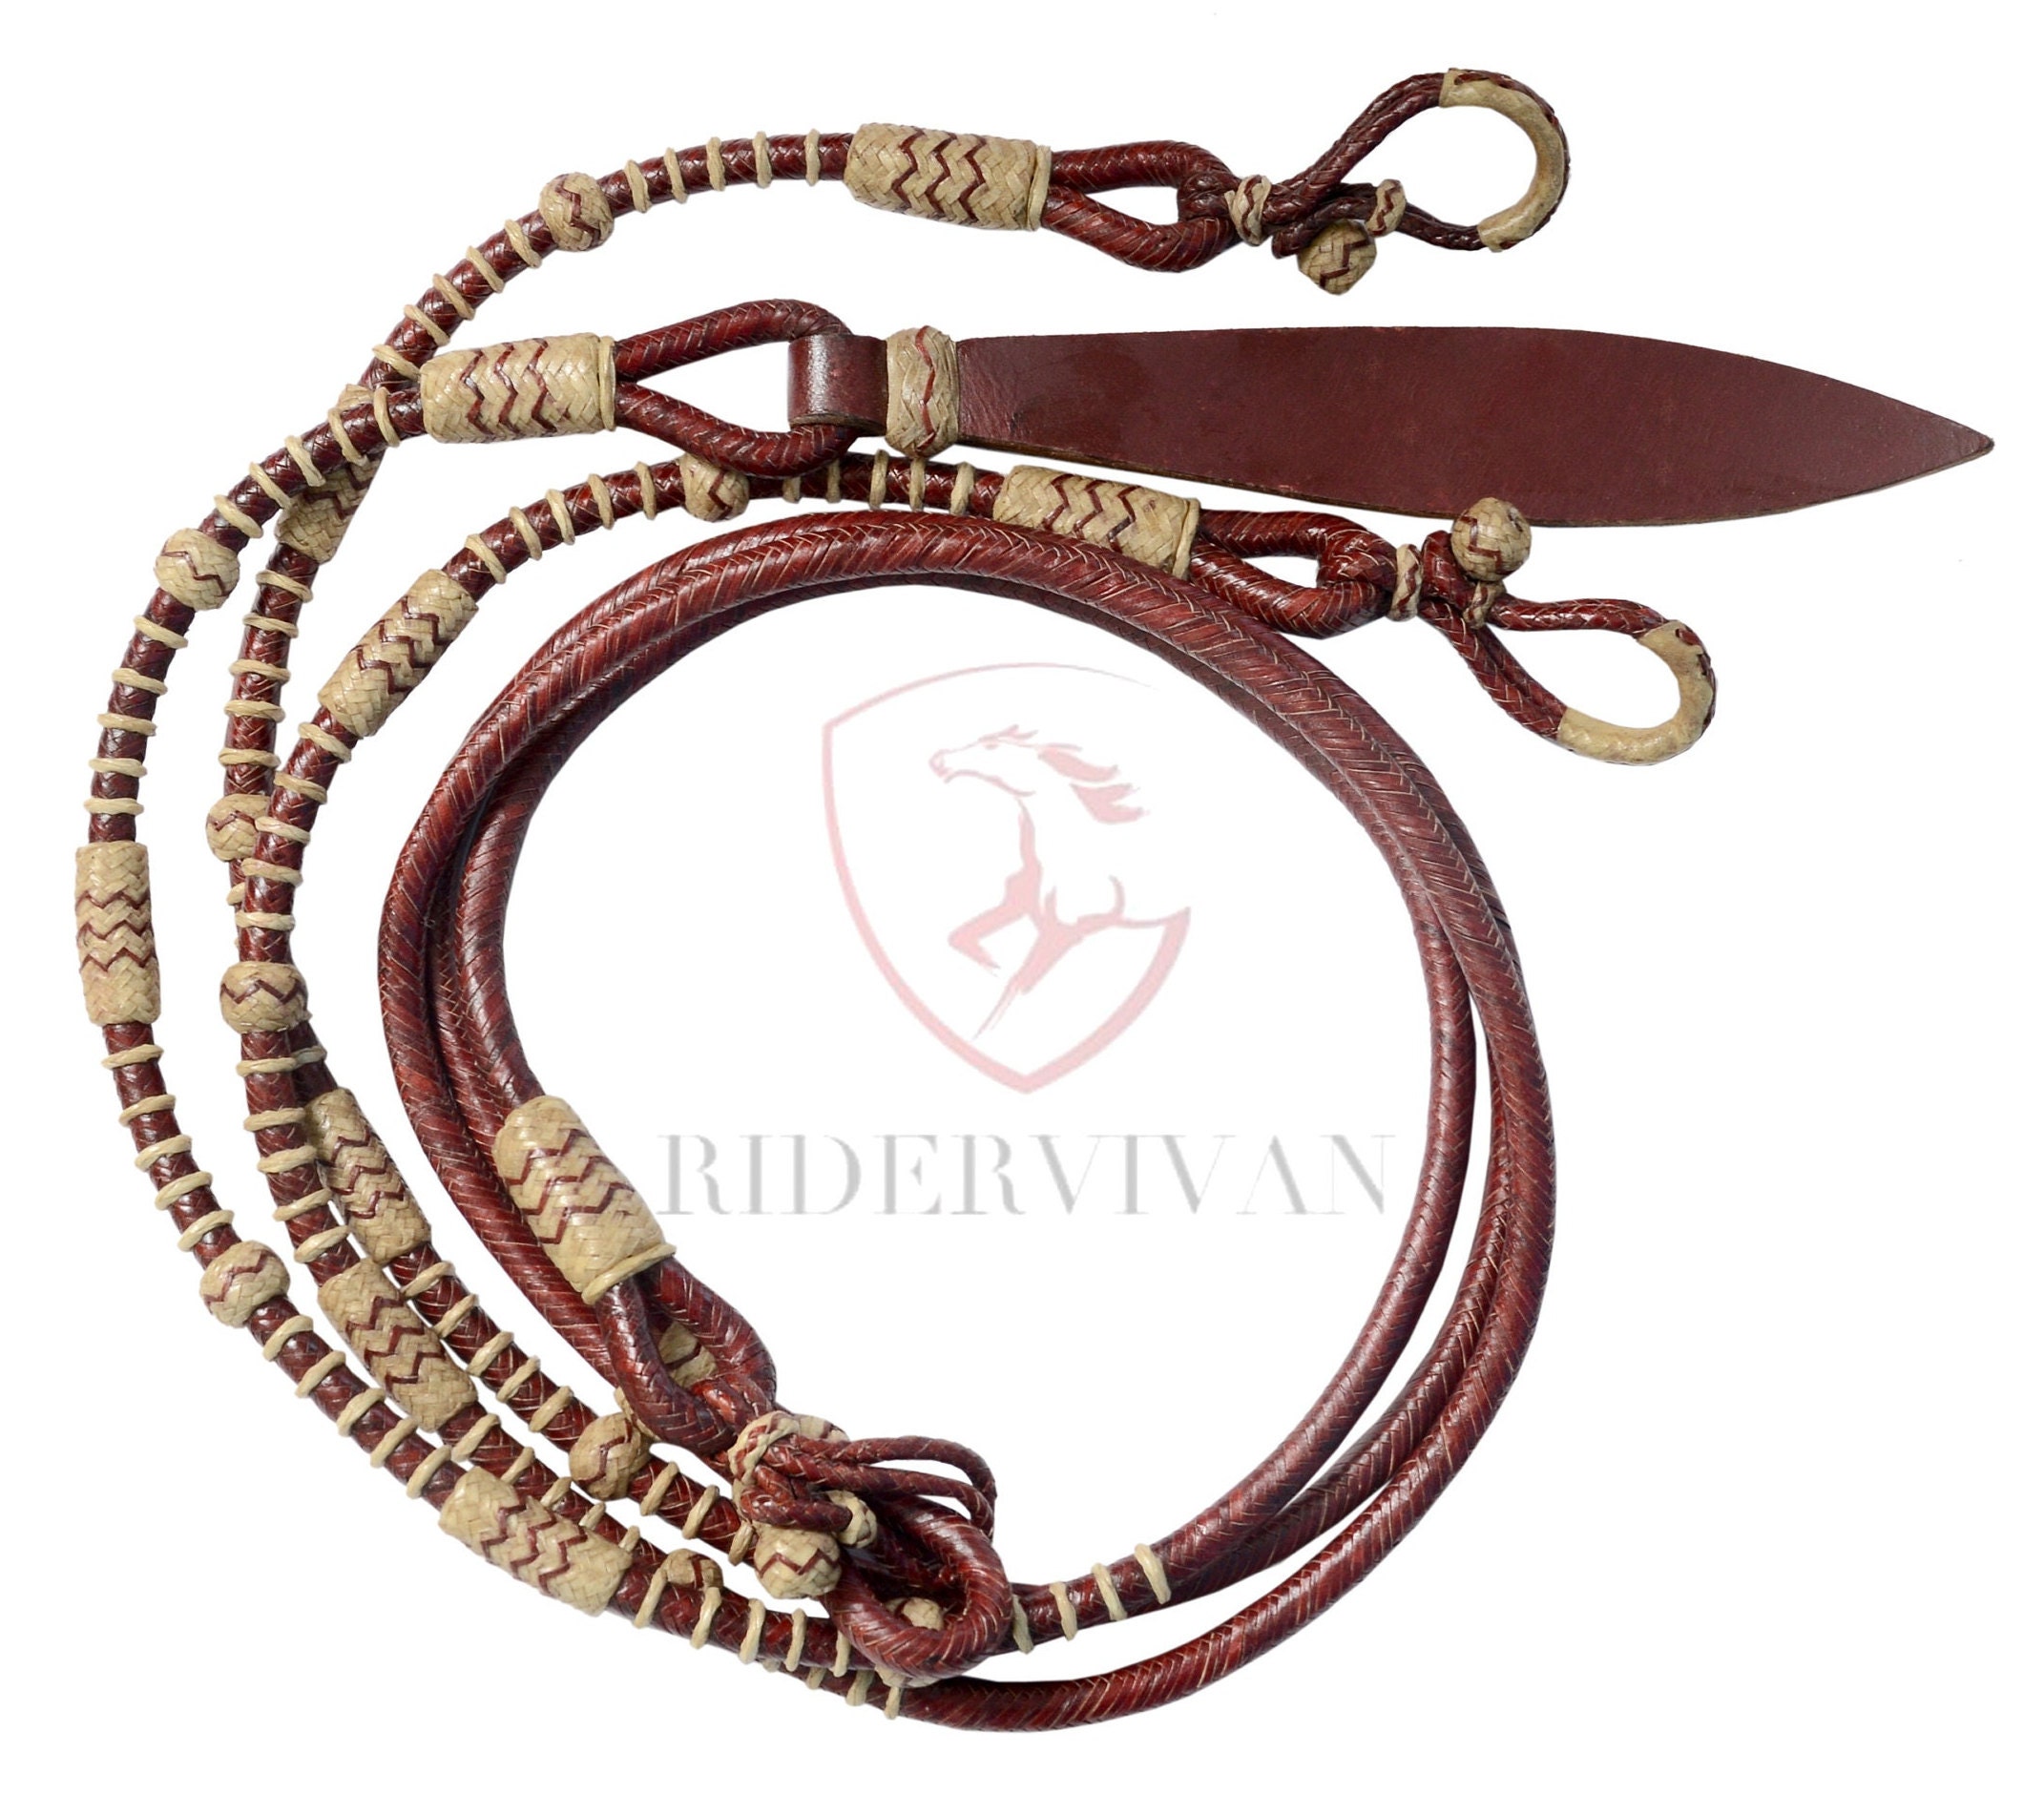 20 Plaits Romal Reins California Style, Romal Reins Chestnut Cherry Rawhide, 55" With Reins Connectors, Specially Hand-Crafted Braided Reins